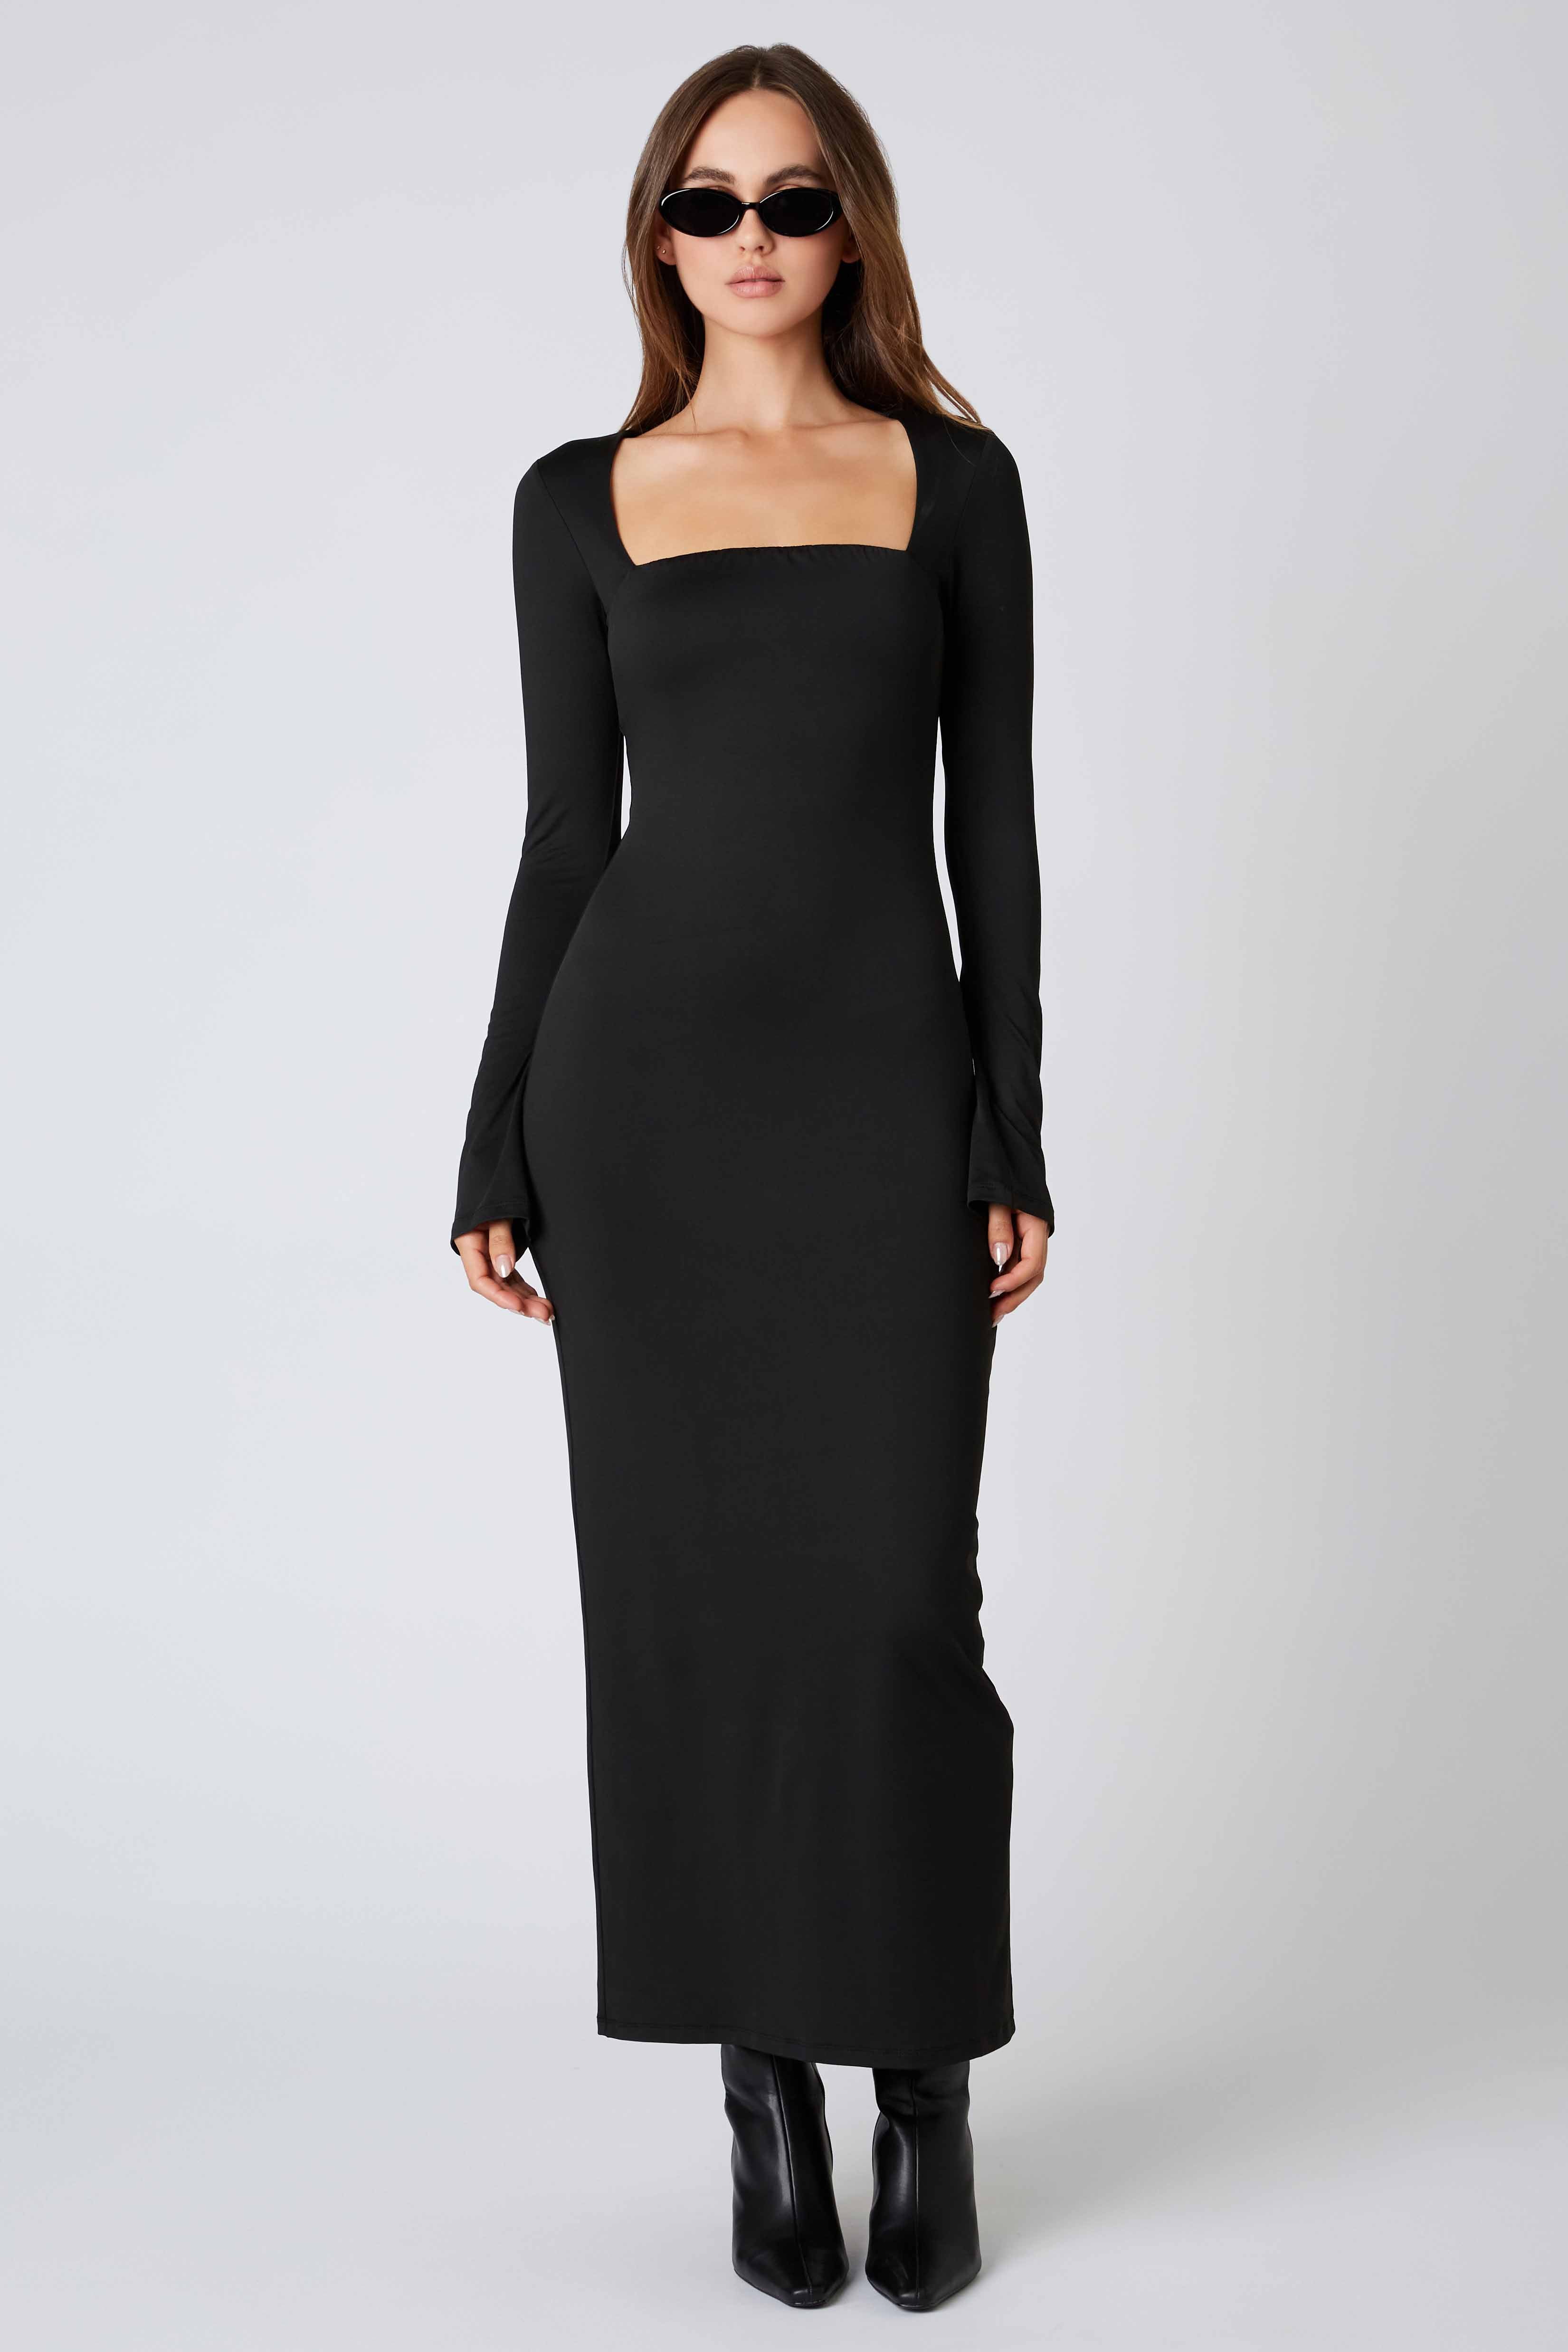 Long Sleeve Maxi Dress in Black Front View